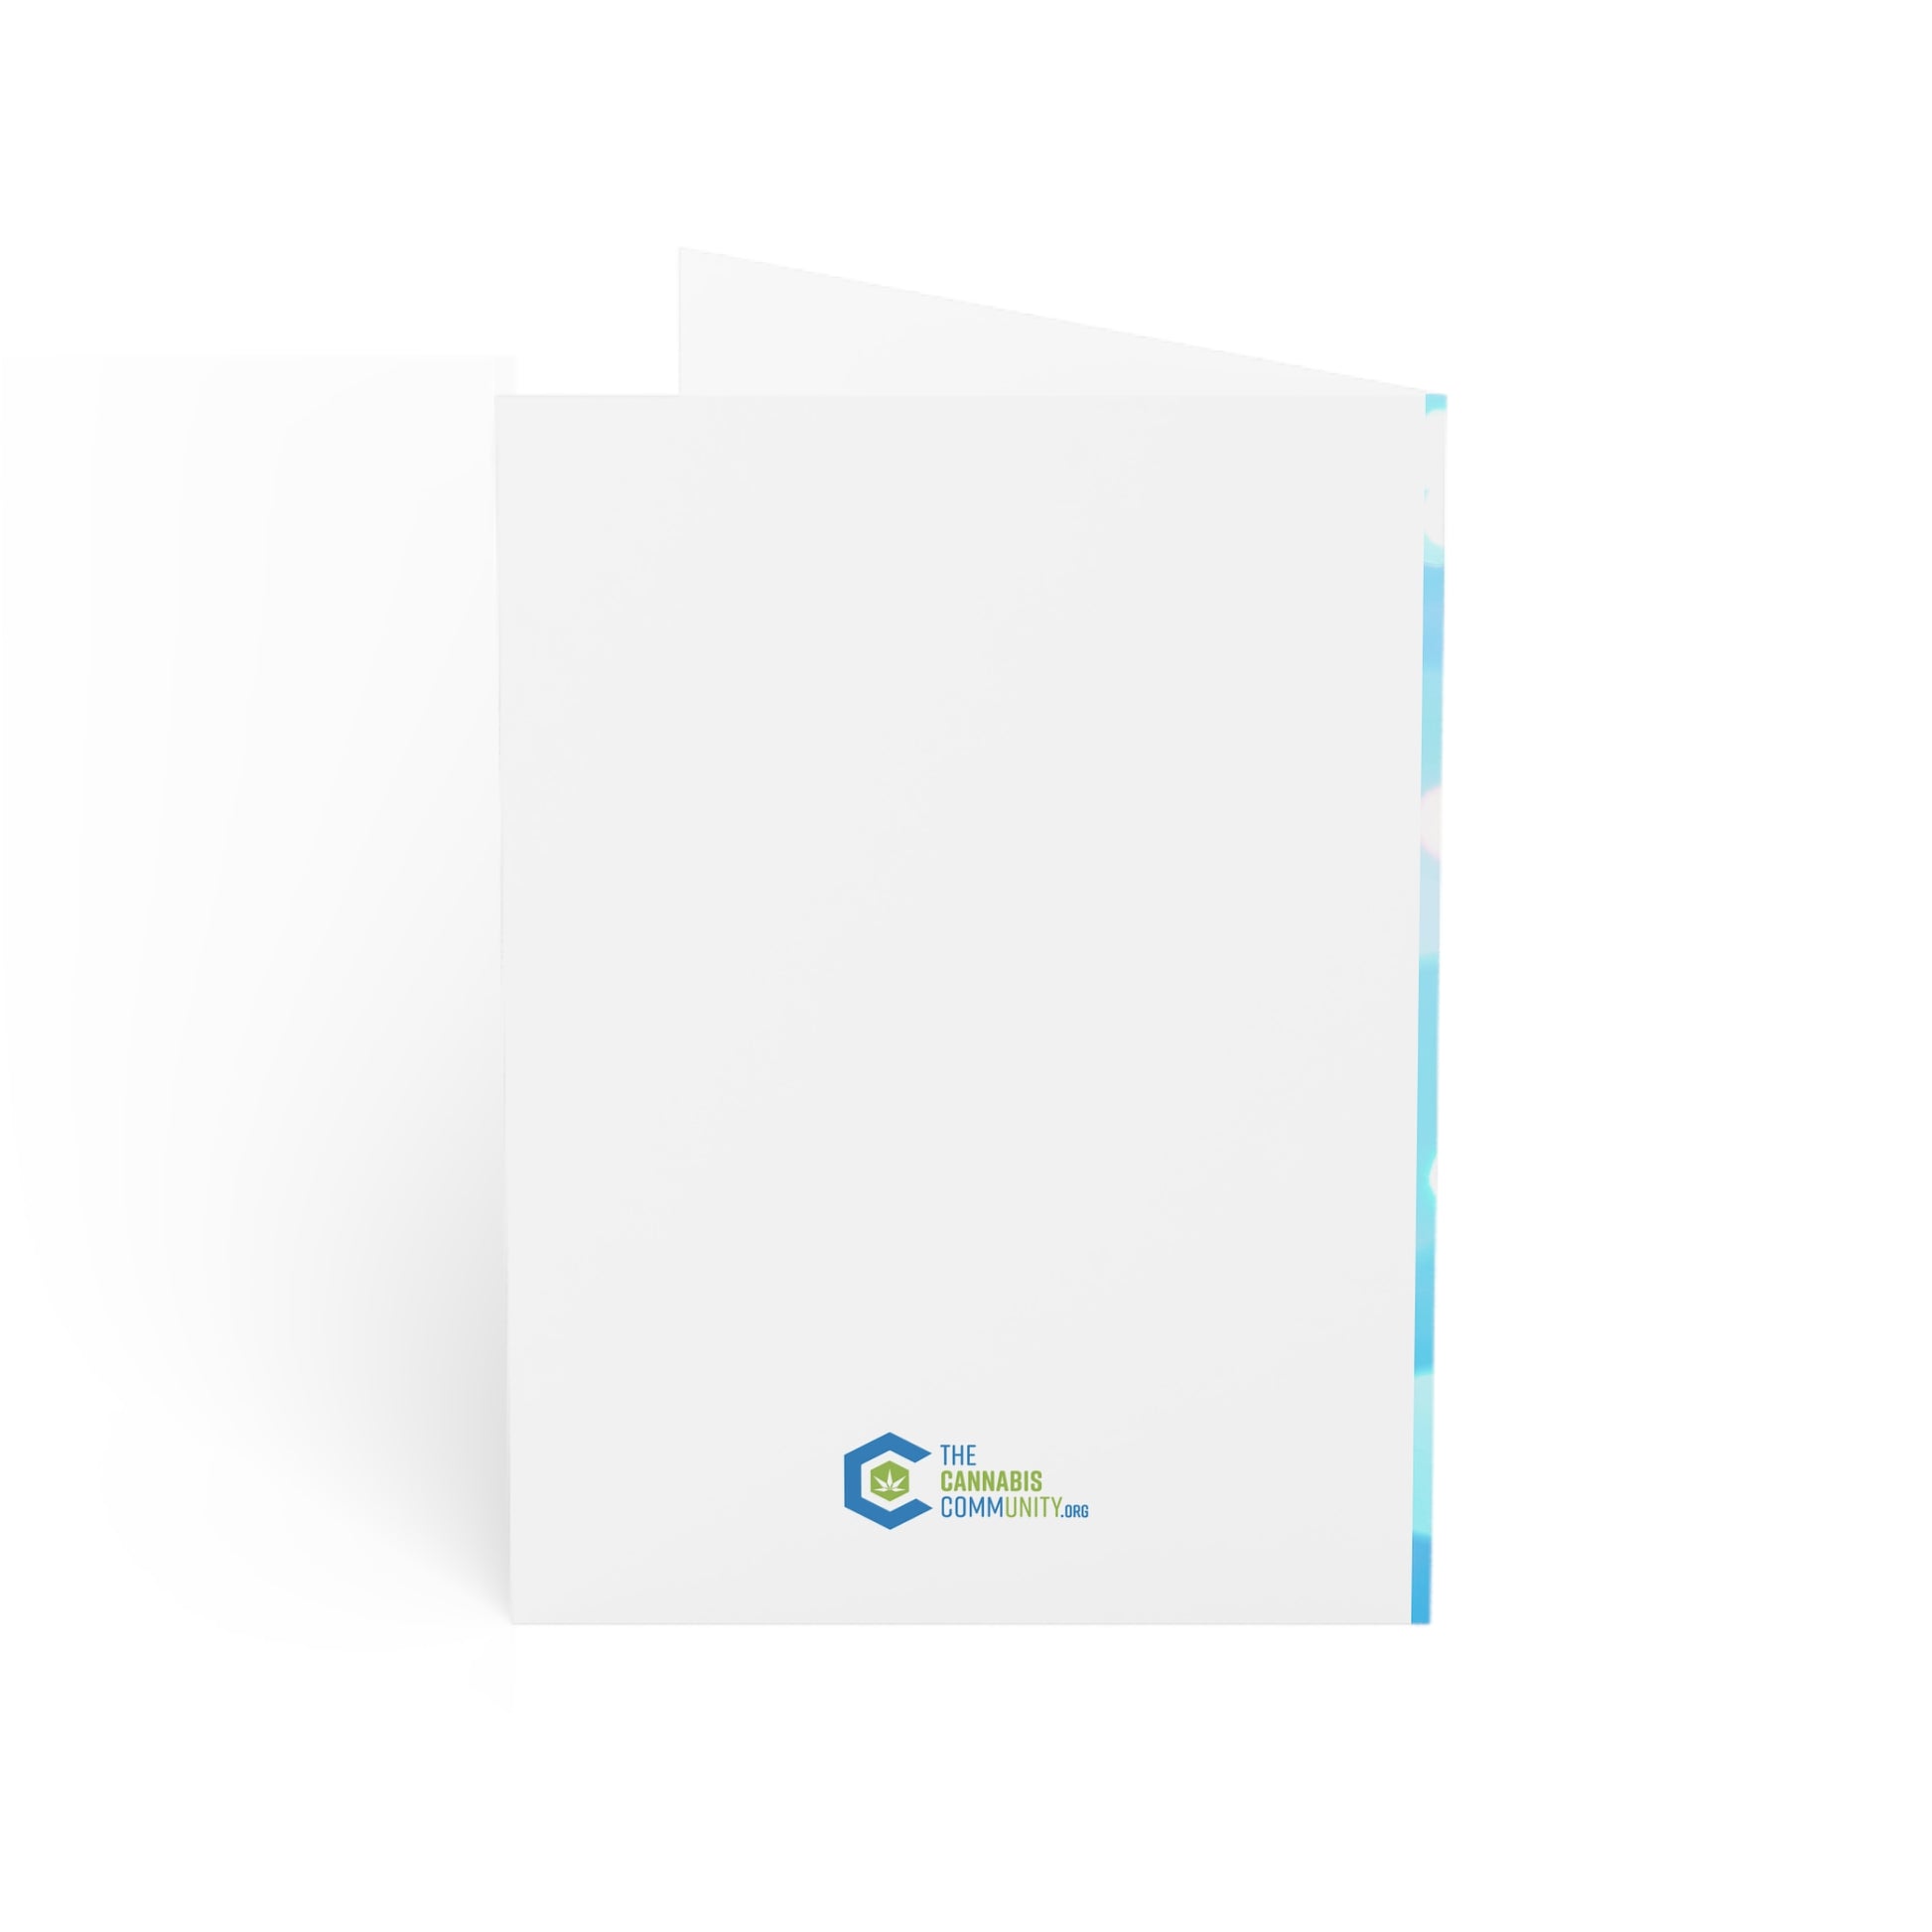 Blank white presentation folder with a light blue spine and the logo of "the harris community center" at the bottom right on the front cover, made from sustainable paper.